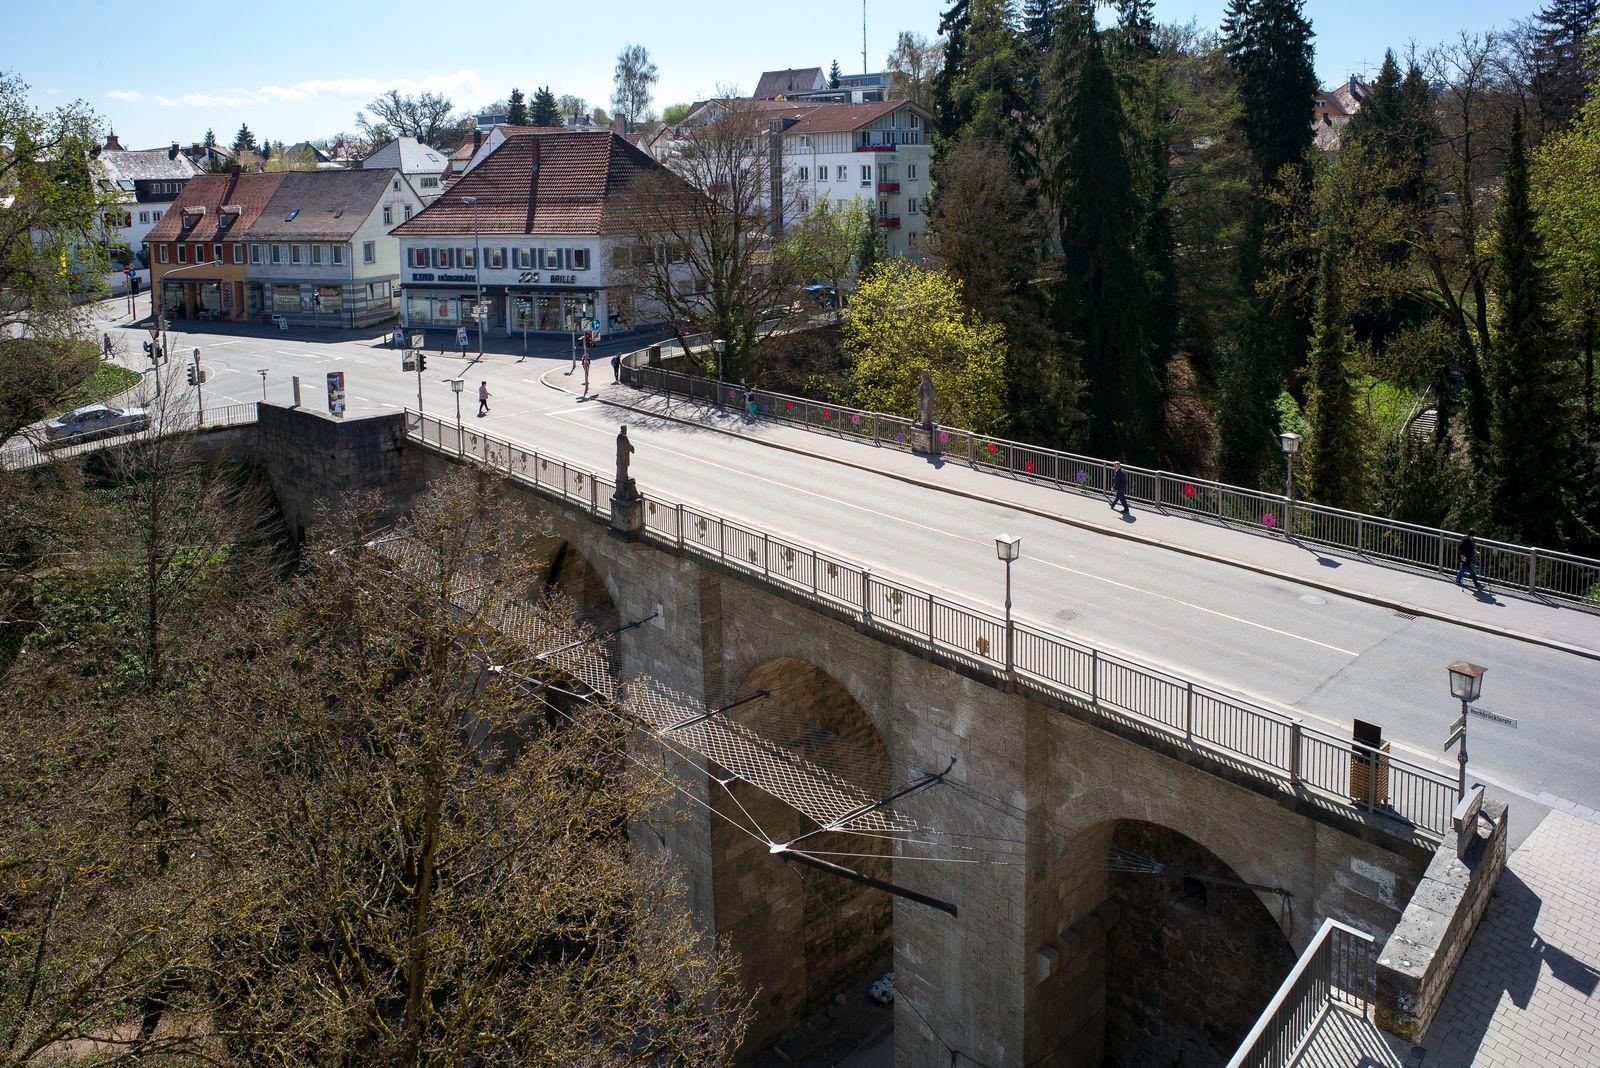 View from above the bridge with street and safety net